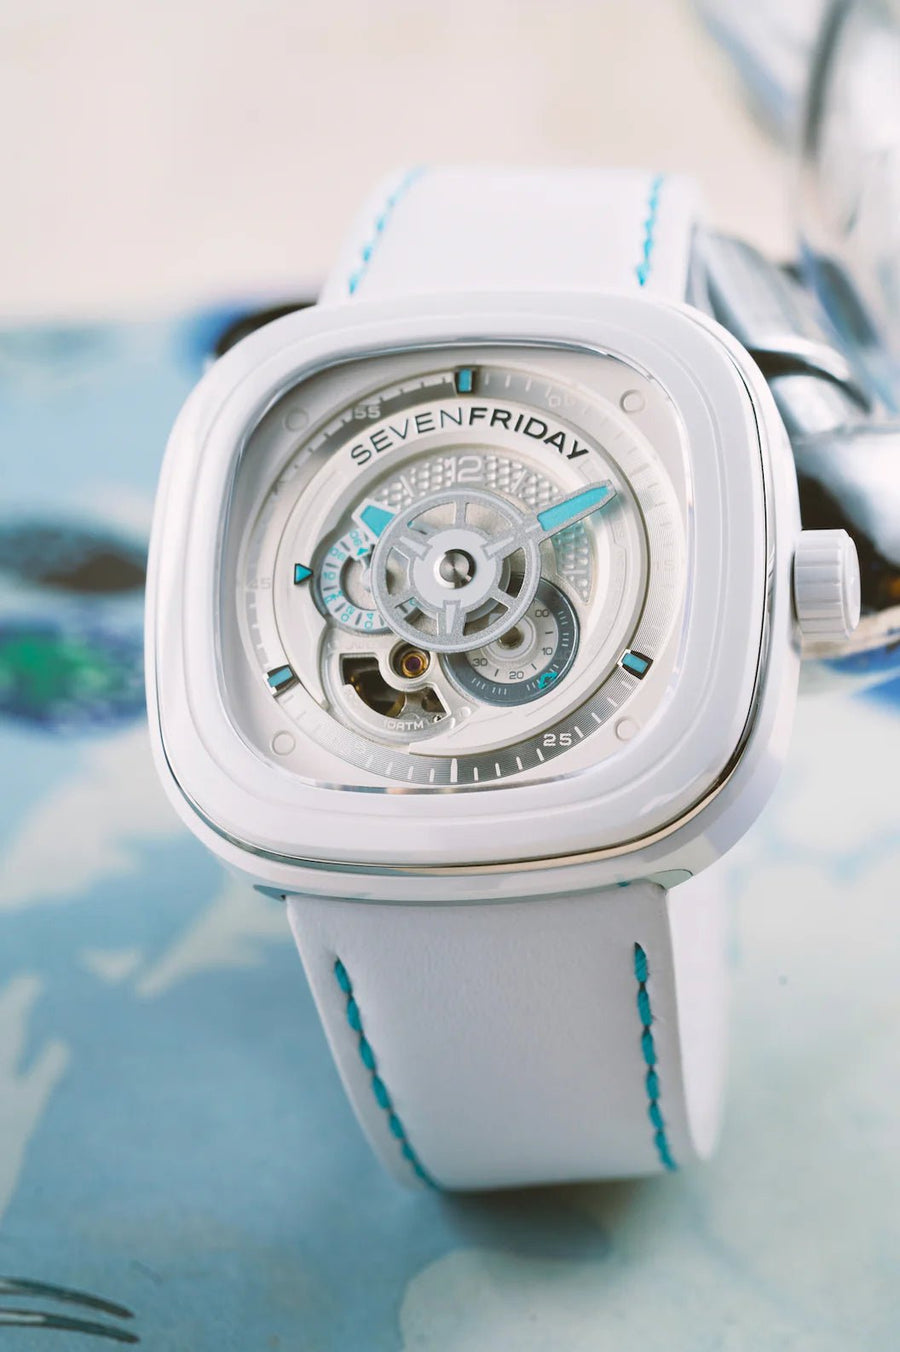 SEVENFRIDAY P1C/05 Curacao - The Independent Collective